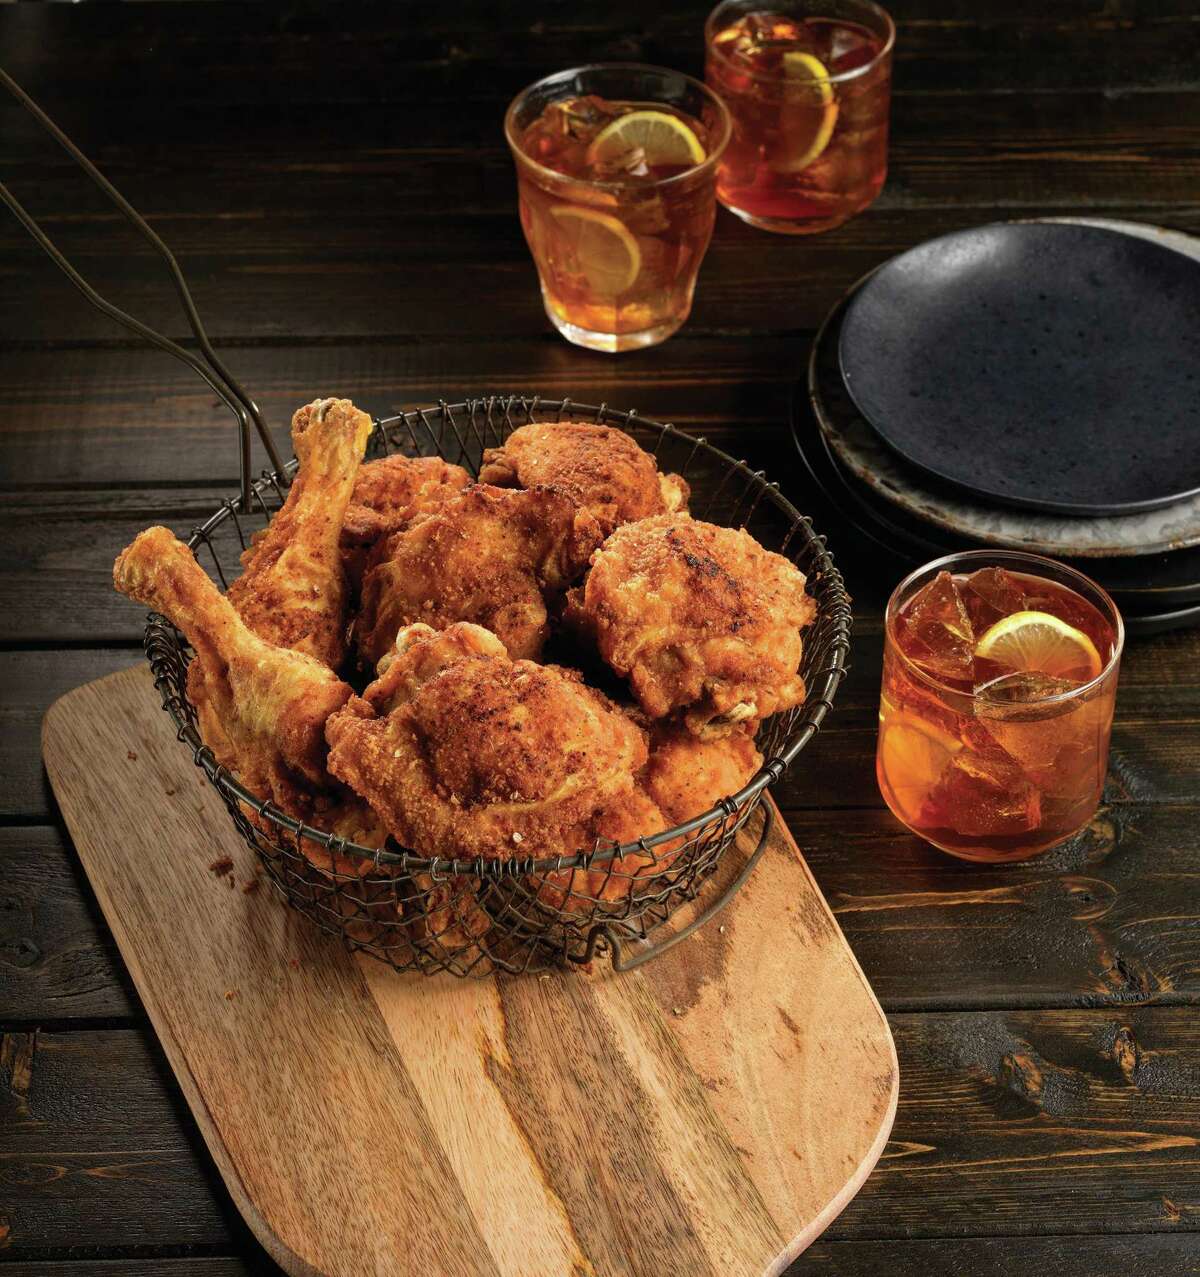 Matty’s Fried Chicken is featured in “Recipes From the President’s Ranch: Food People Like to Eat” by Matthew Wendel. This recipe and more, page D6